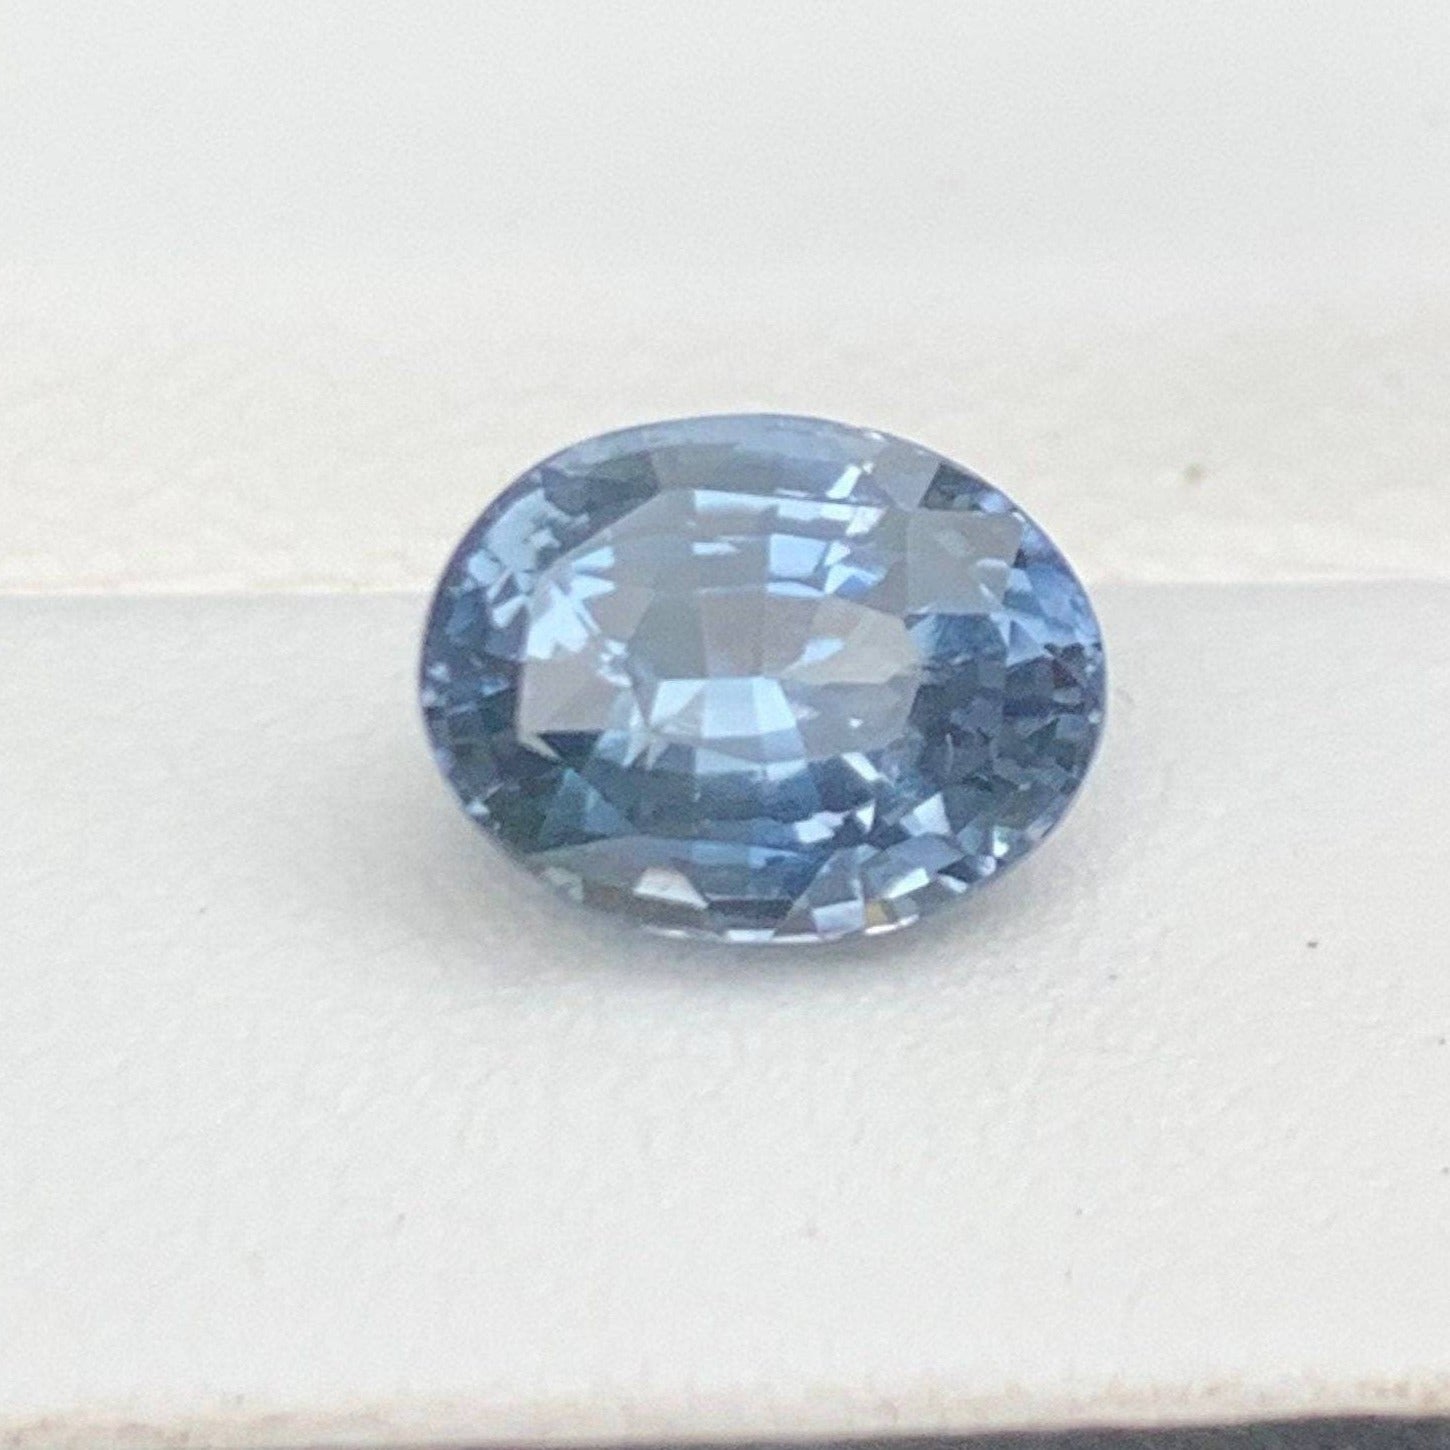 Silver Sapphire 3.37 Cts, Silver Sapphire Loose Gemstone, White Sapphire Gemstone for Gift, Silver Sapphire for Jewelry Making, Gift for her - Baza Boutique 